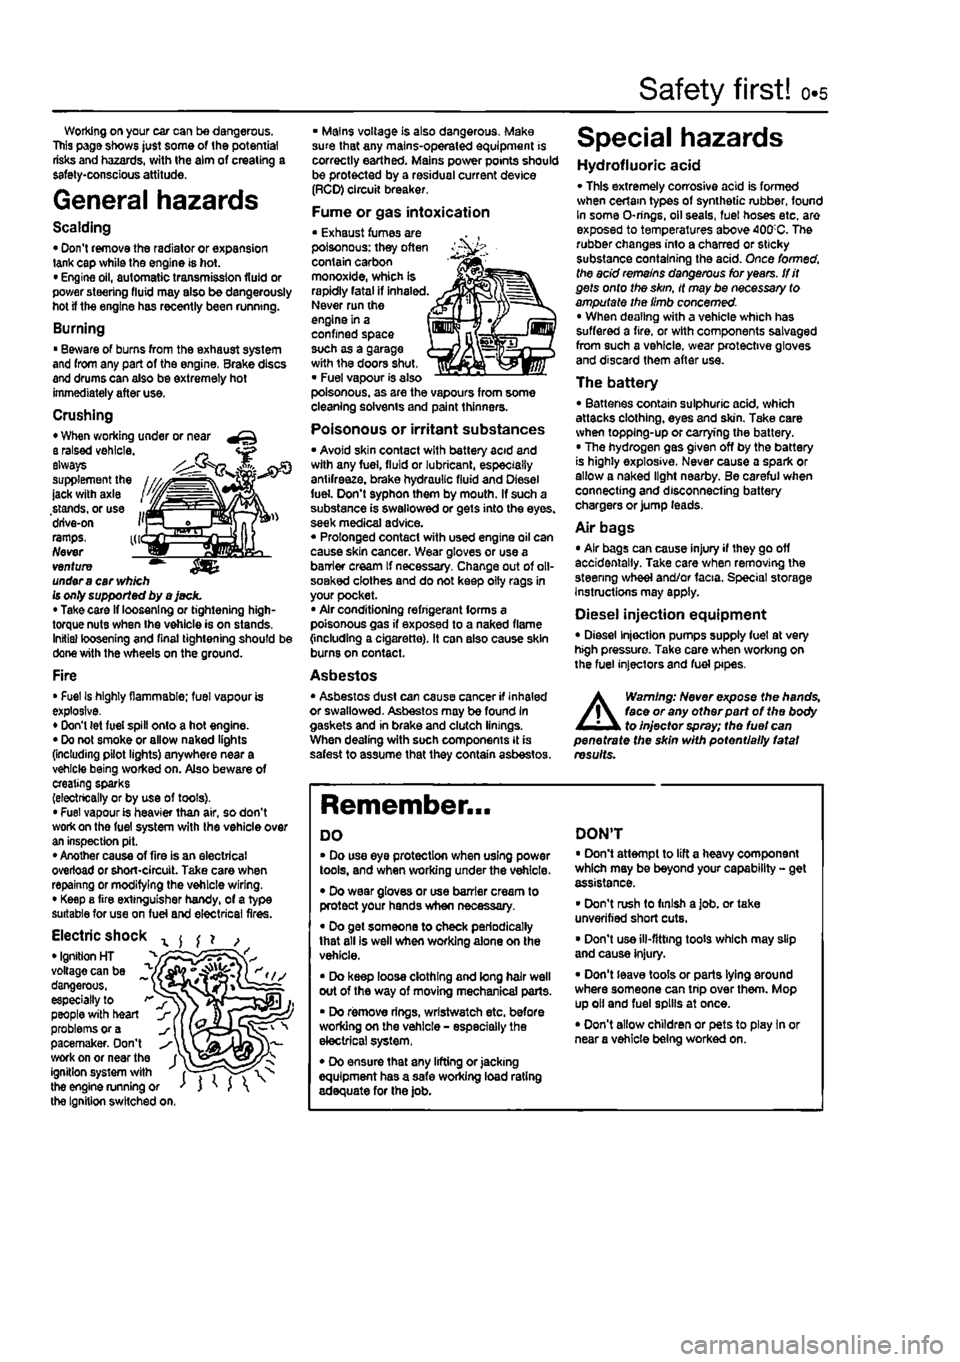 FIAT PUNTO 1995 176 / 1.G Workshop Manual 
Safety first! 0.5 
Working on your ear can be dangerous. This page shows just some of the potential risks and hazards, with the aim of creating a safety-conscious attitude. 
General hazards 
Scalding